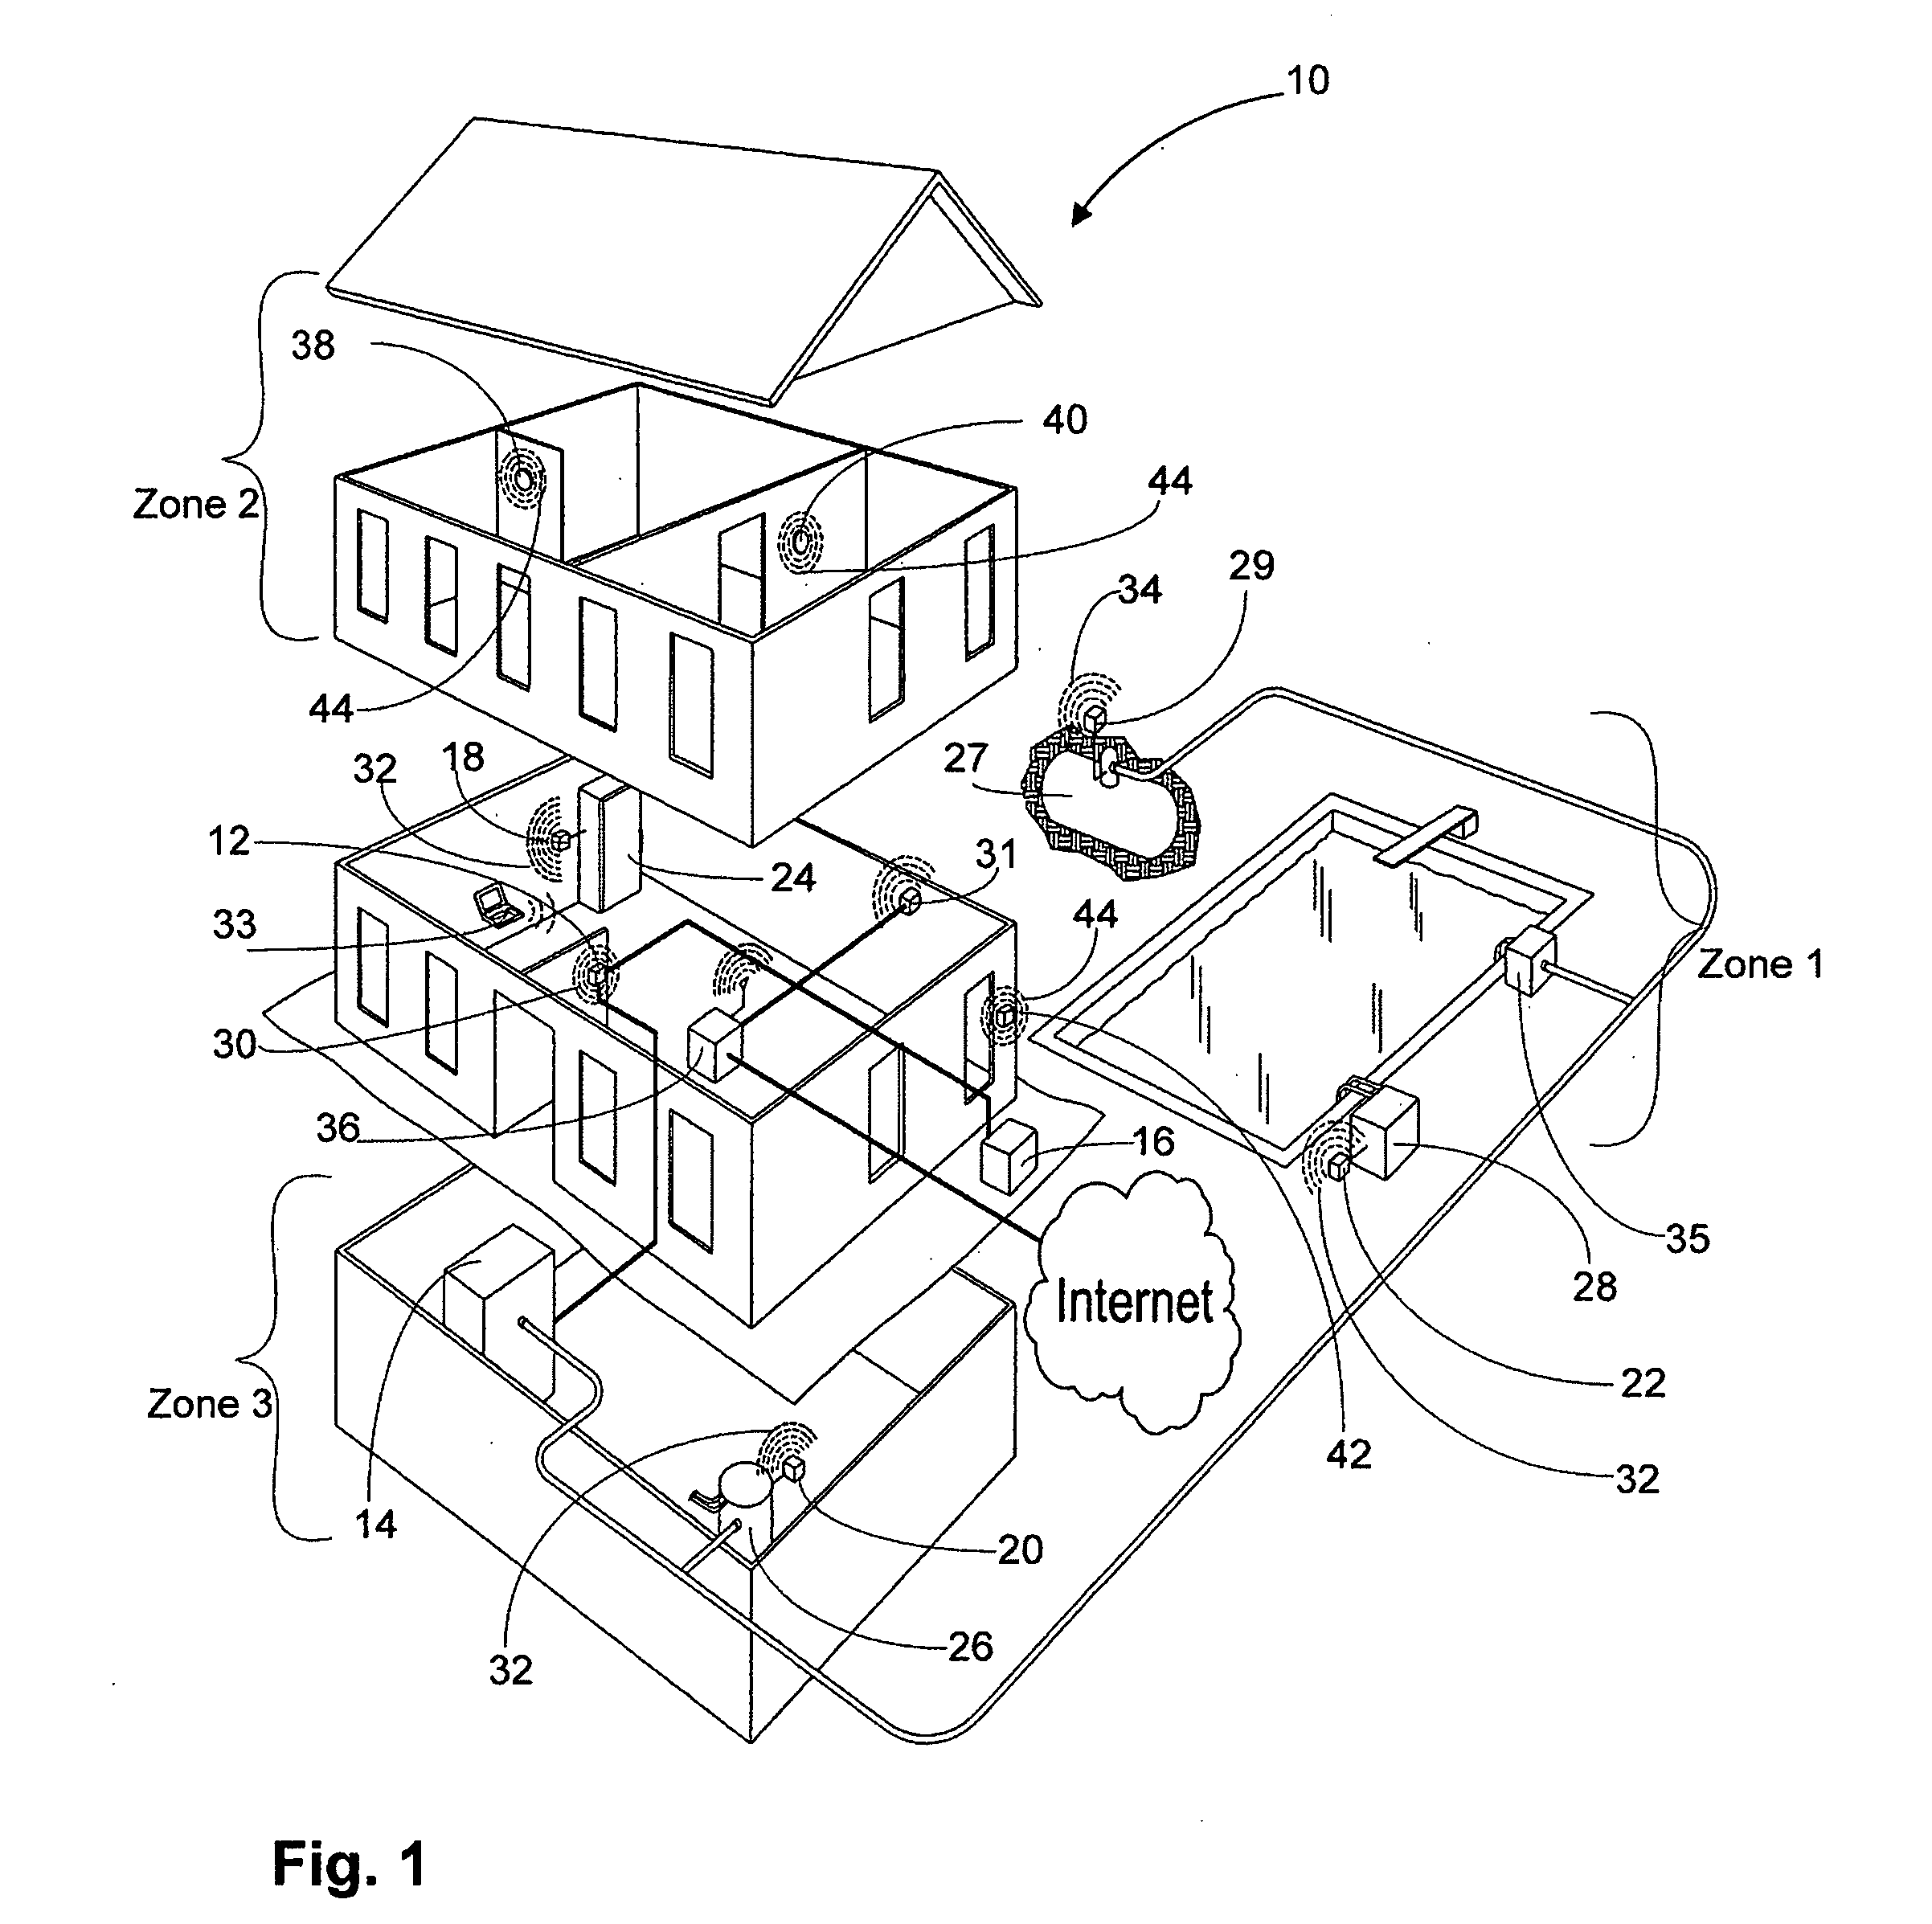 Networked appliance information display apparatus and network incorporating same